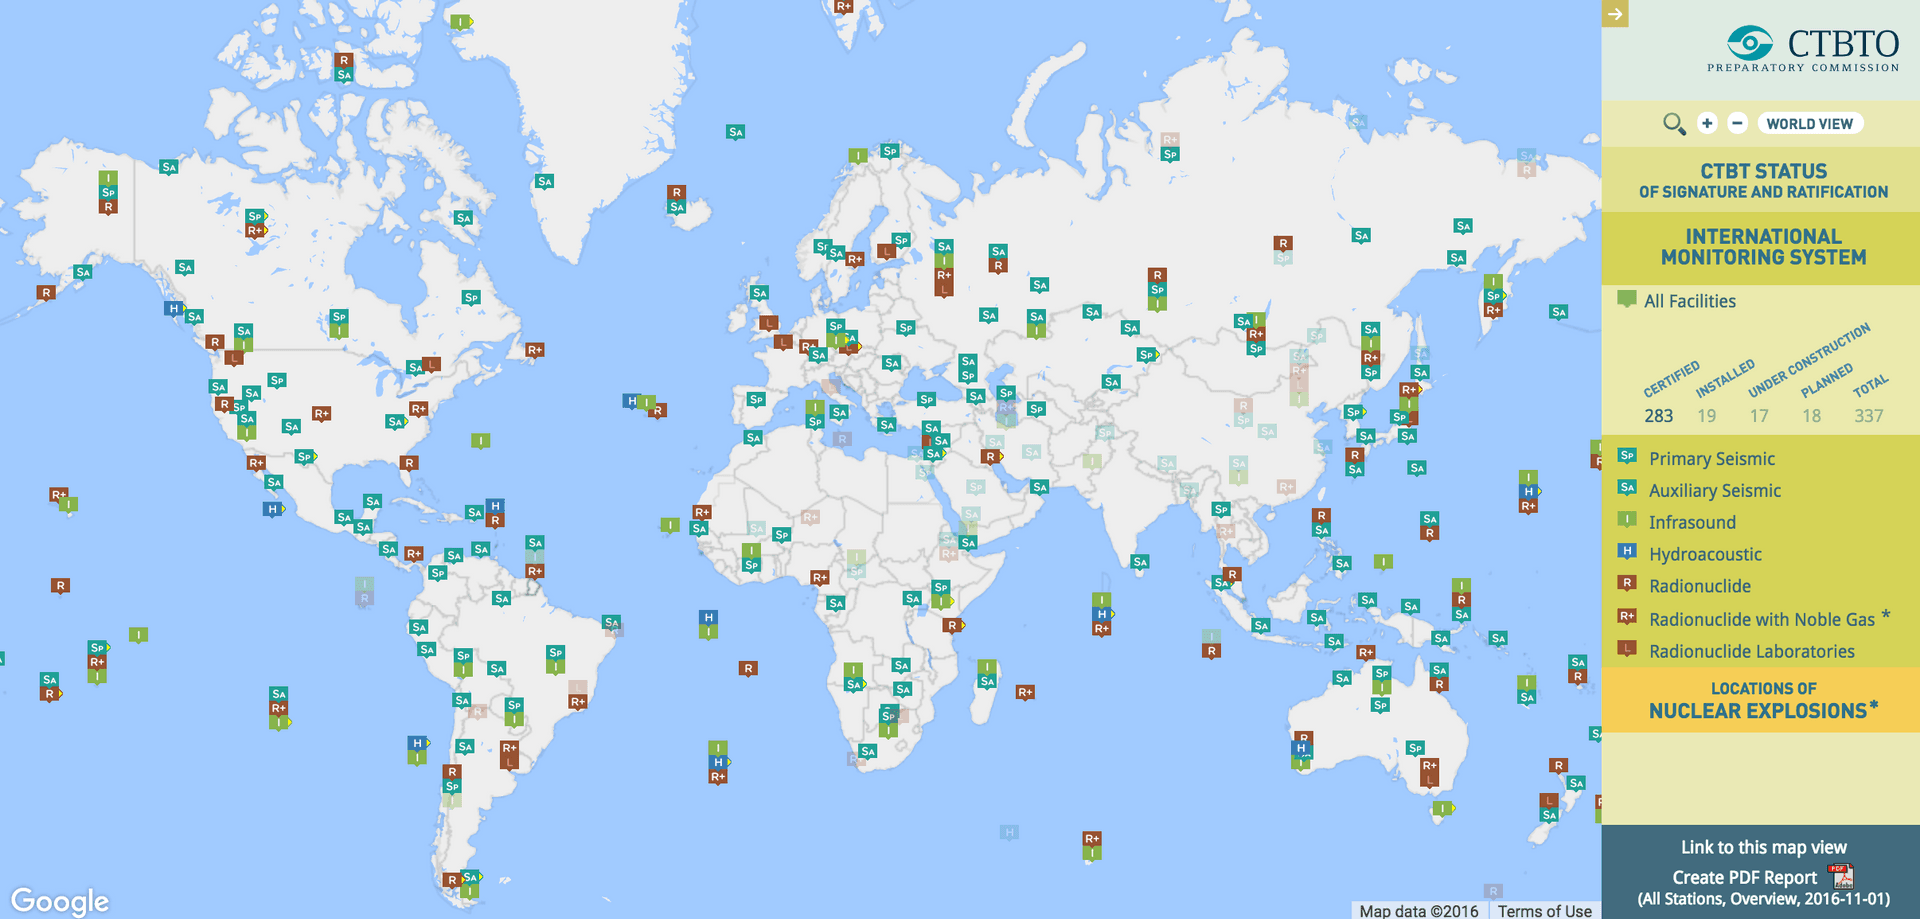 A map of the Comprehensive Nuclear-Test-Ban Treaty Organization Preparatory Commission's International Monitoring System for detecting nuclear tests, as of Nov. 1, 2016.